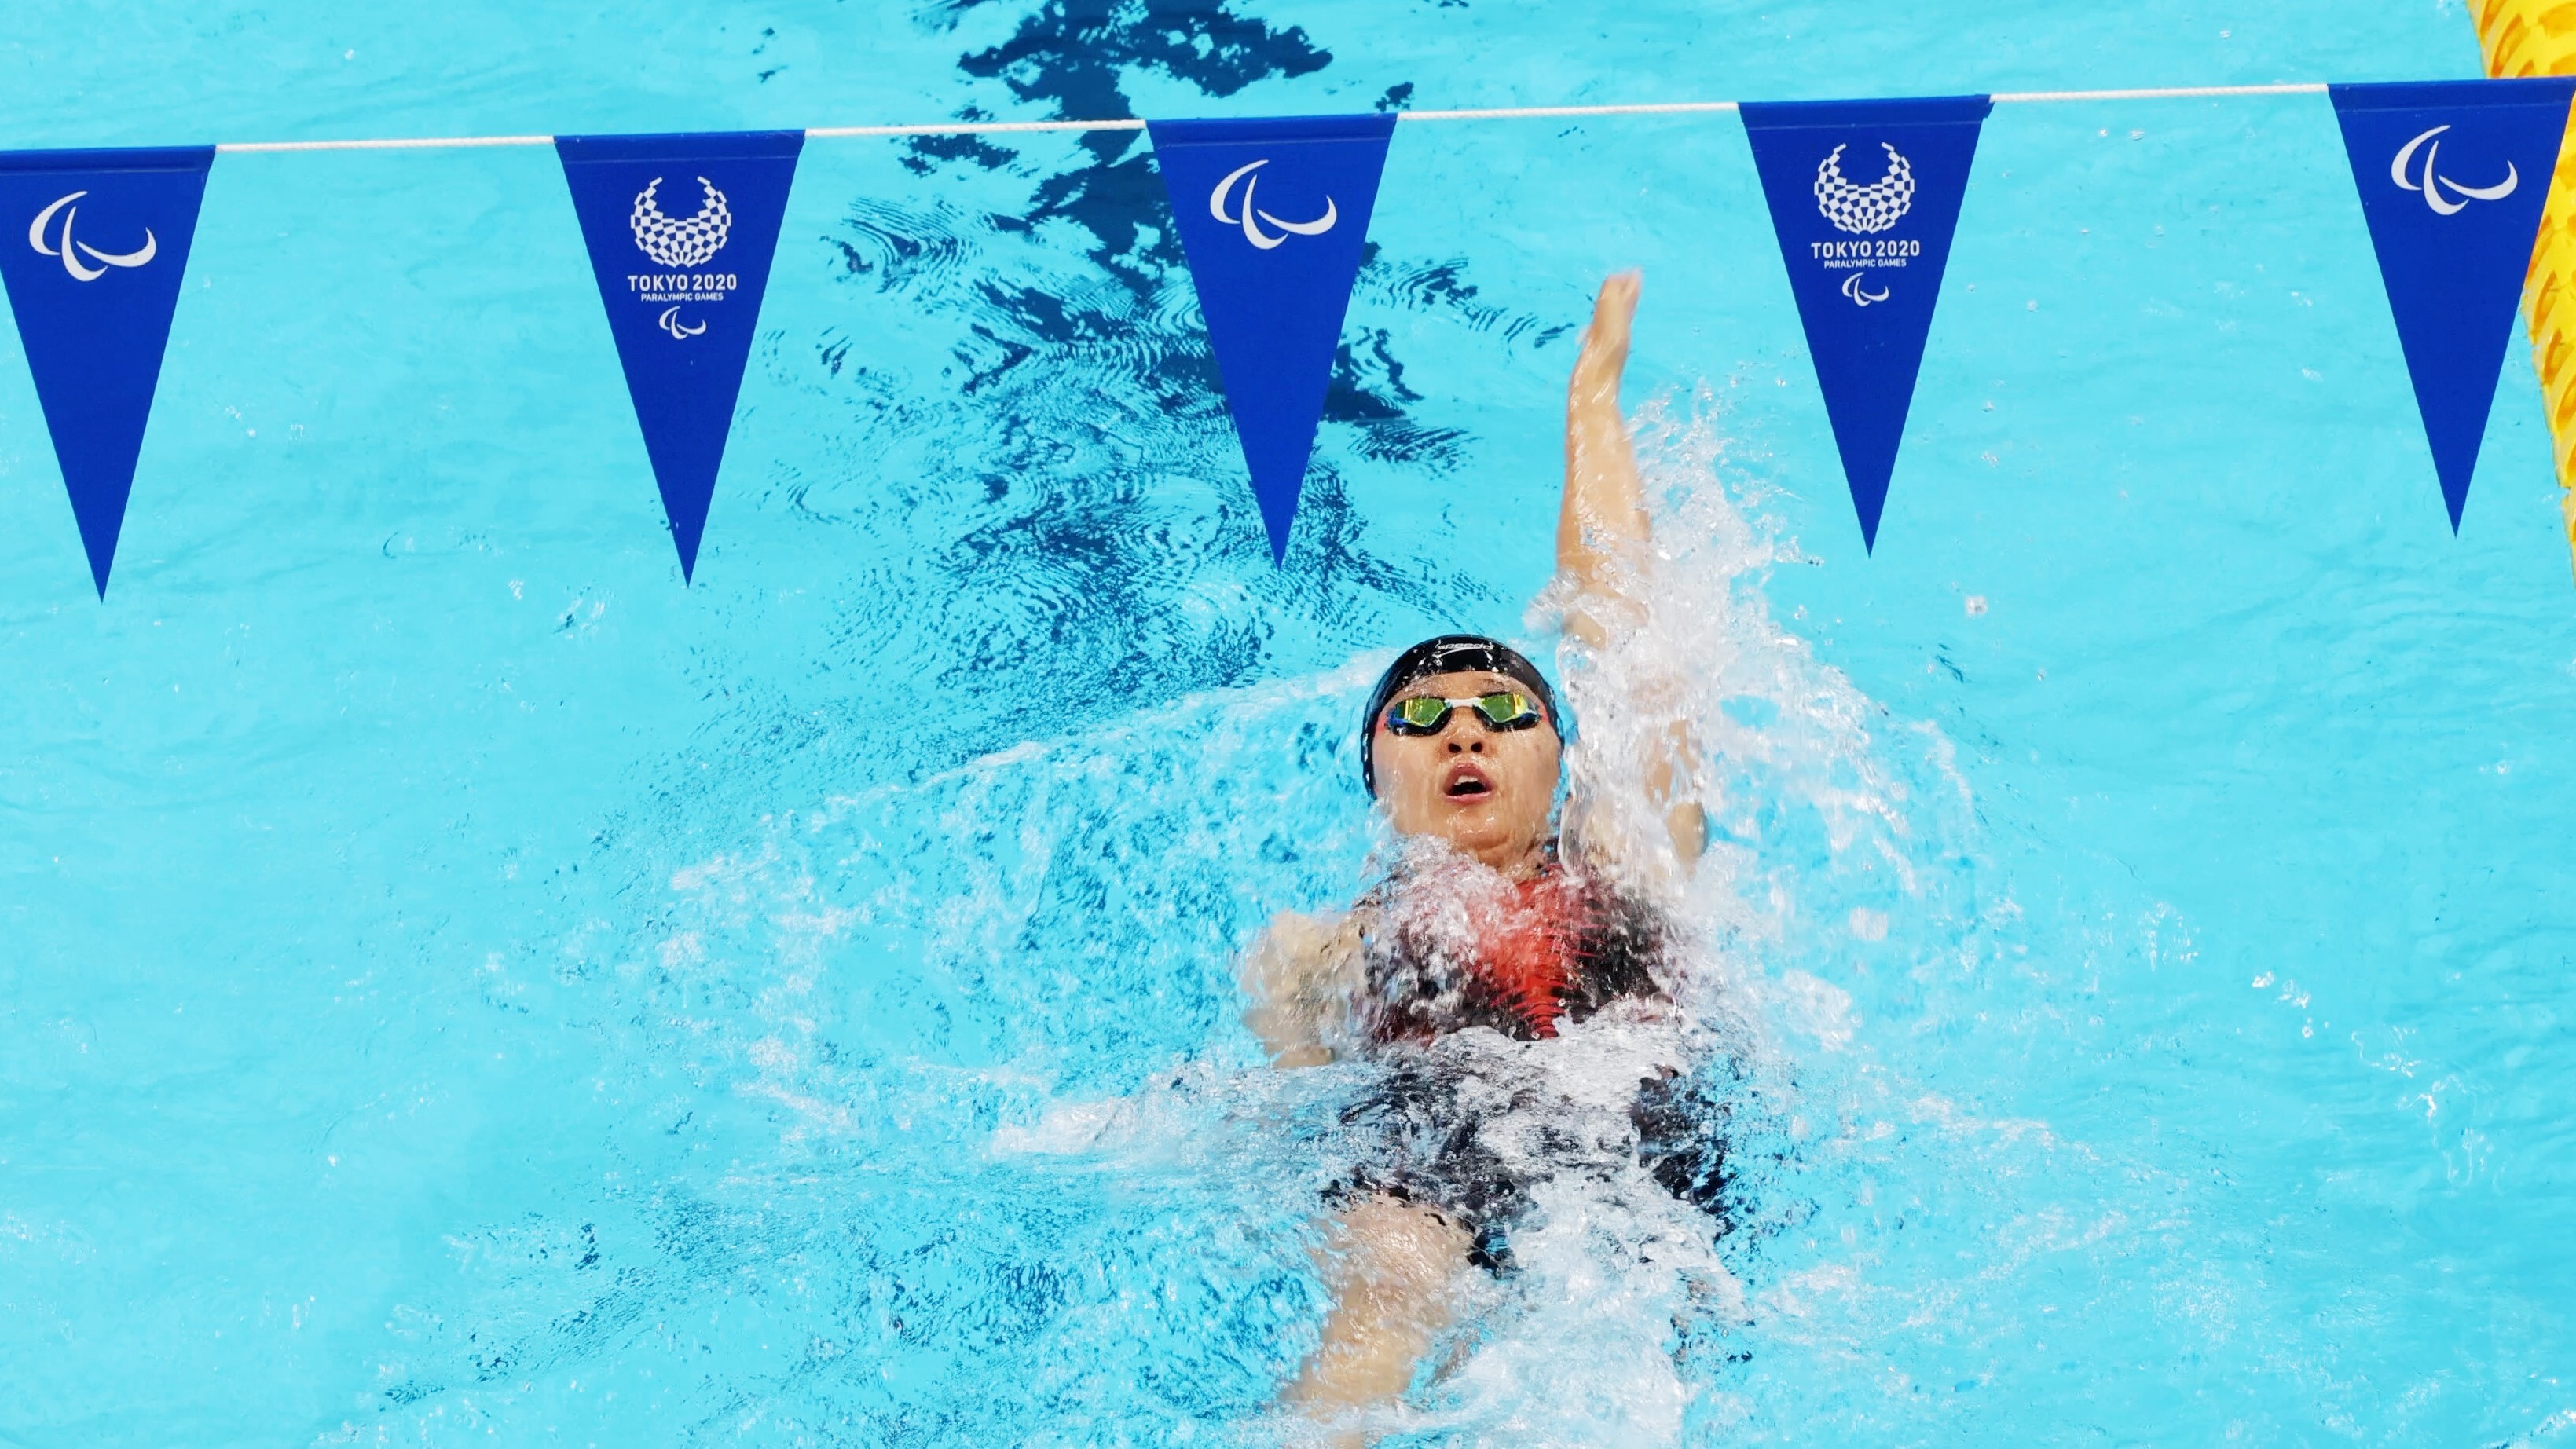 Chan Yui-lam, a 2019 world championships gold medallist, completes her third final after swimming in a staggering six events on her Paralympic Games debut. Photo: Hong Kong Paralympic Committee